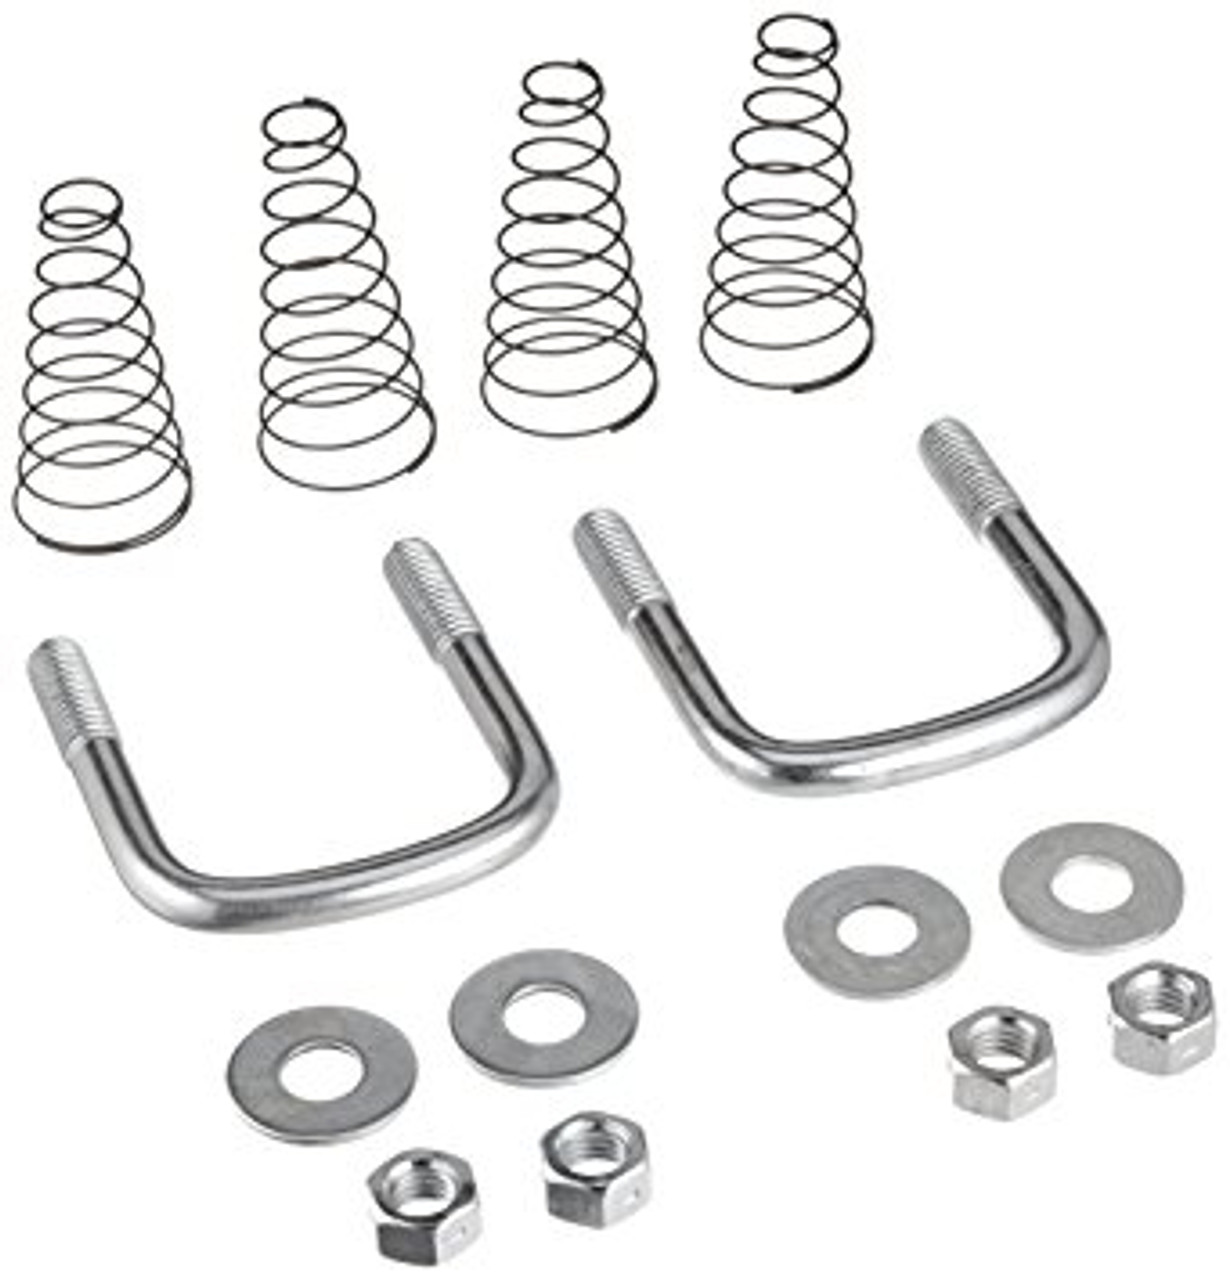 Reese Replacement Part Goosene ck Head U-Bolt Kit for # - REE58312